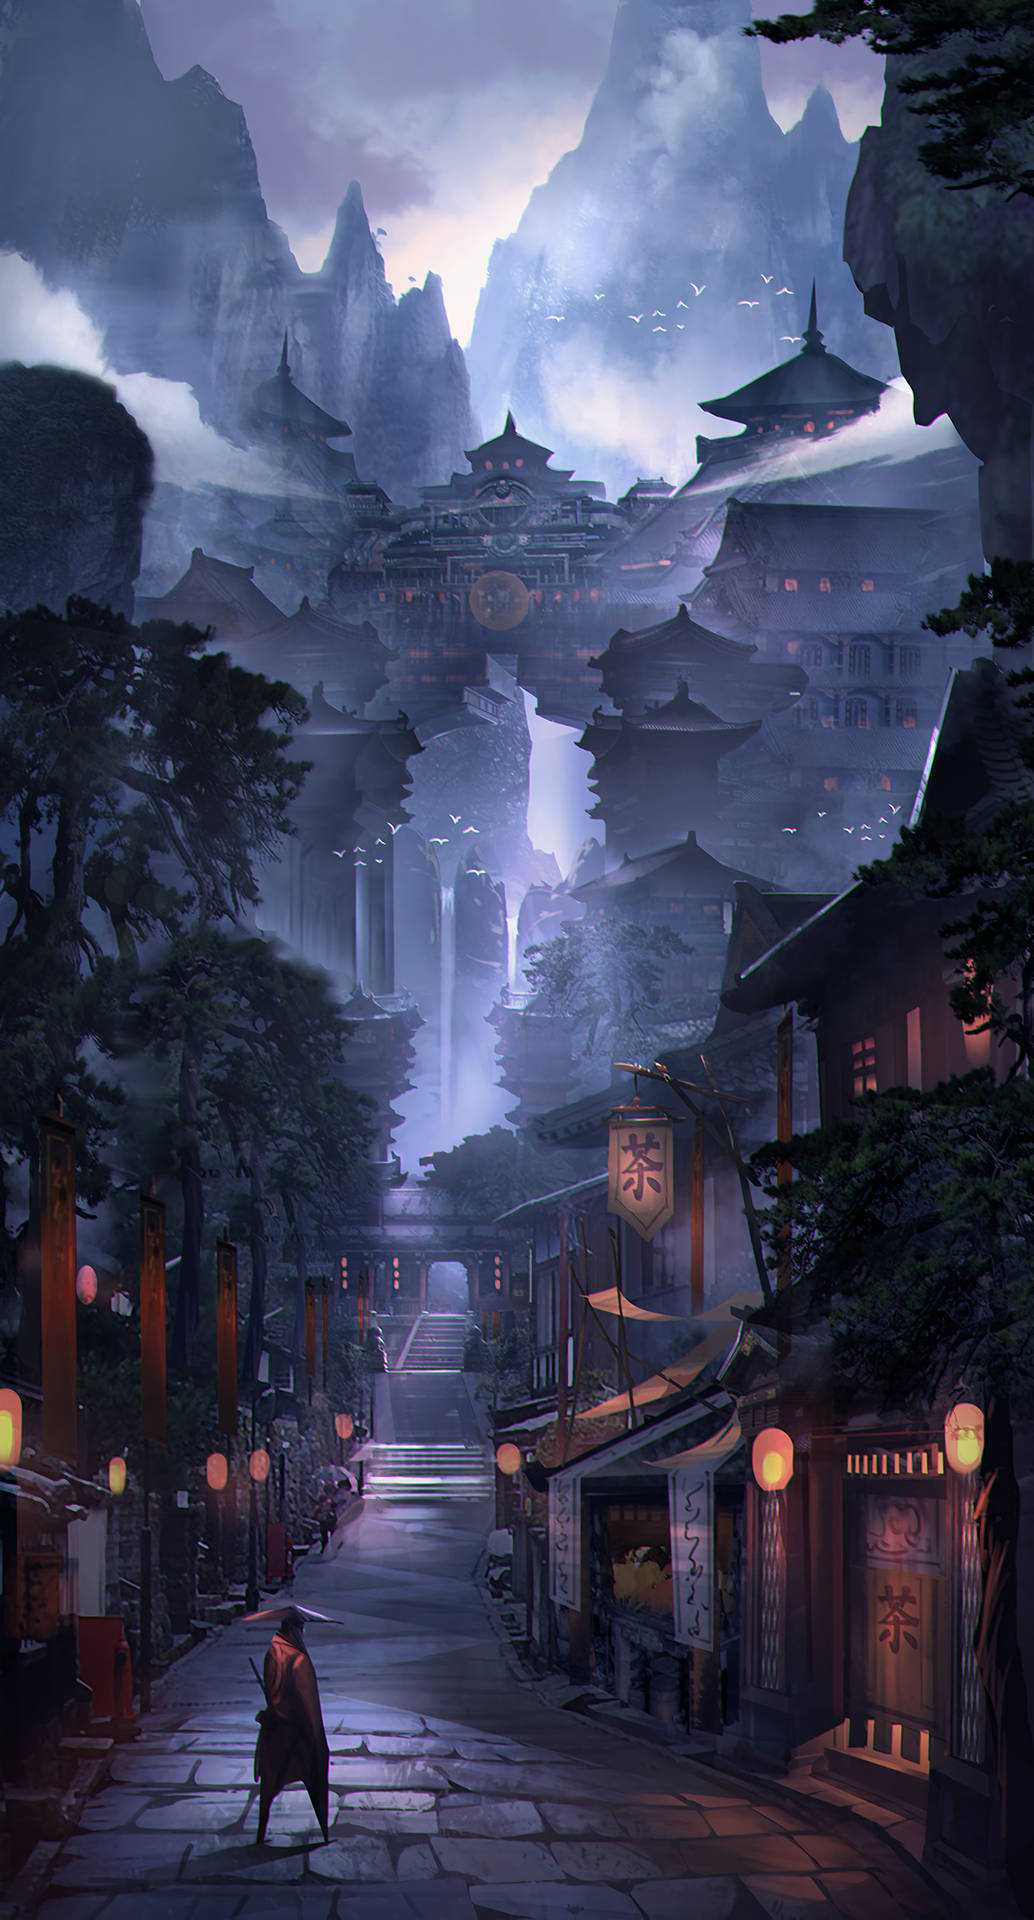 A Lone Samurai Stands In A Historic Japanese Alleyway. Background